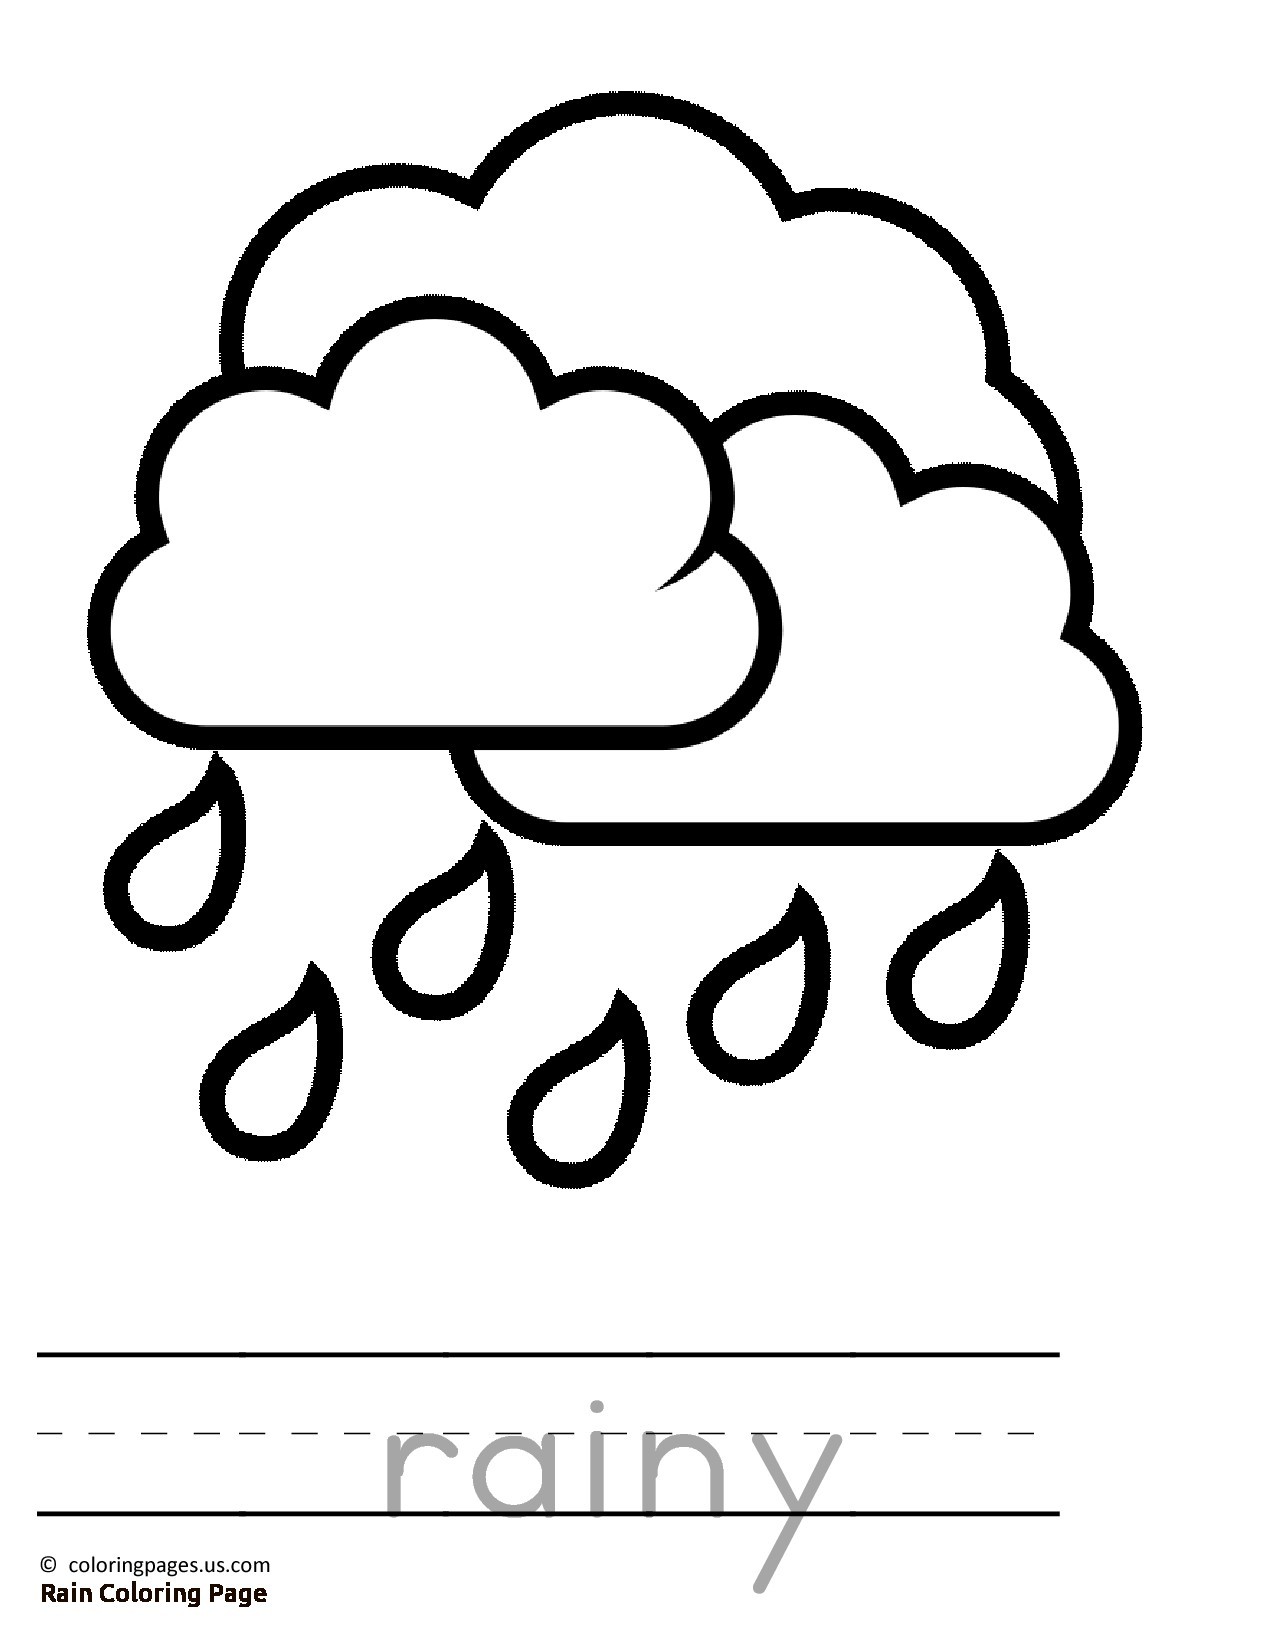 Stratus Cloud Drawing at GetDrawings.com | Free for personal use ...